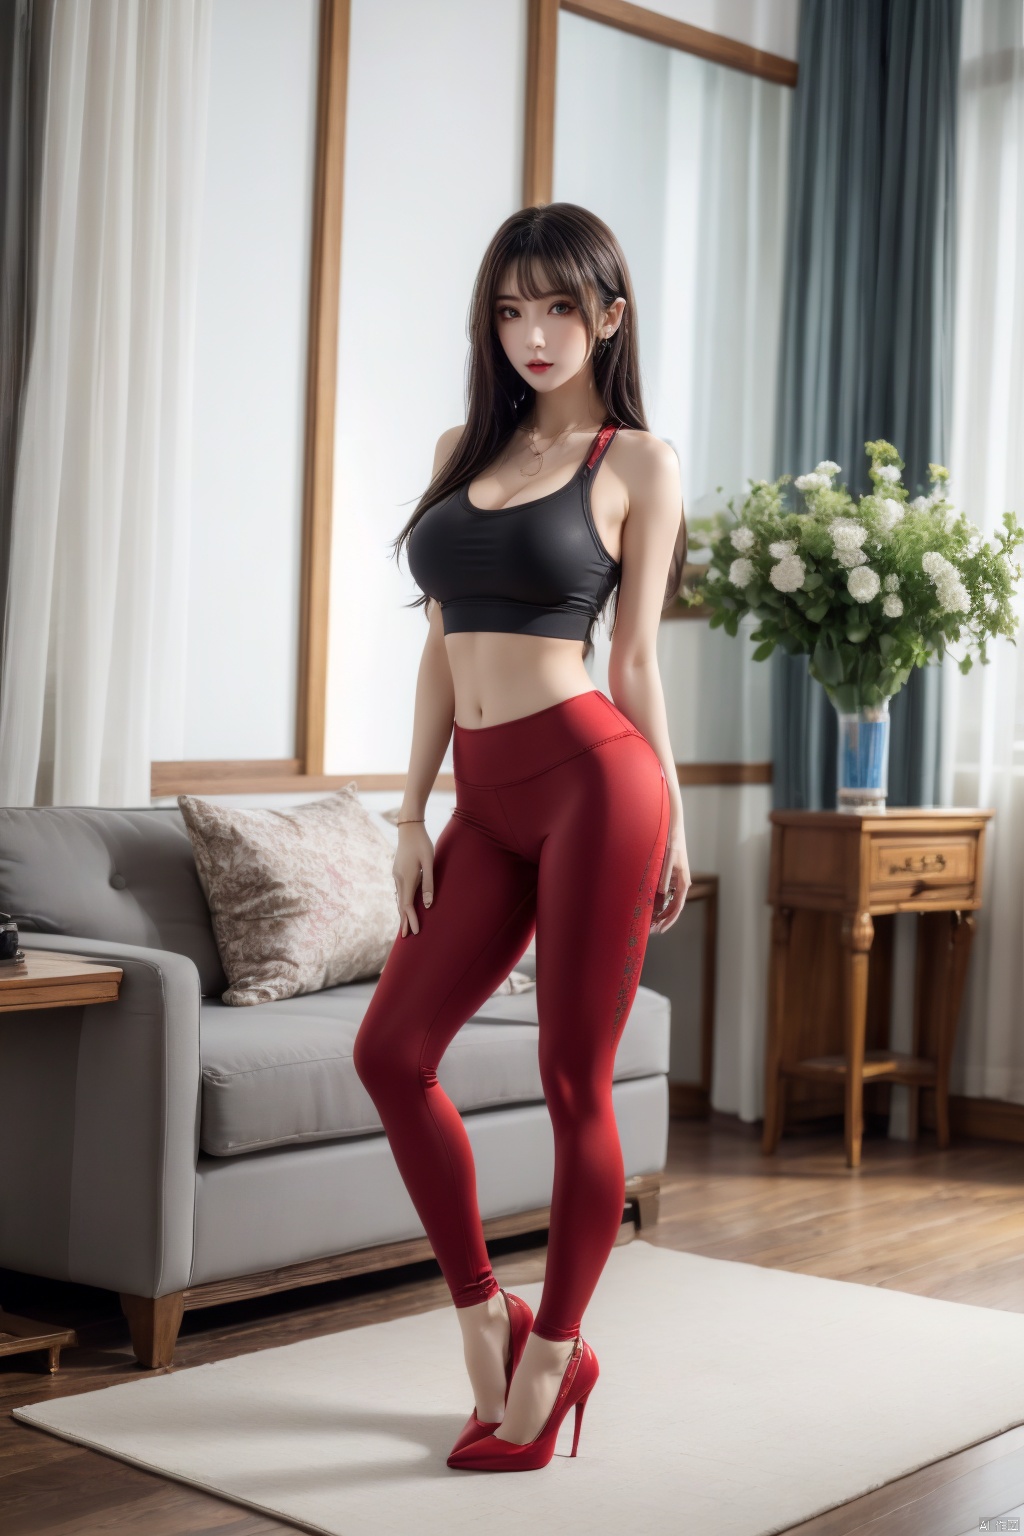 masterpiece,best quality,extremelydetailed,1girls,fair_skin,long hair,big breasts,yoga clothes,Yoga pants,long legs,(red_high_heels),full body,living room,flowers,looking_at_viewer,(standing),